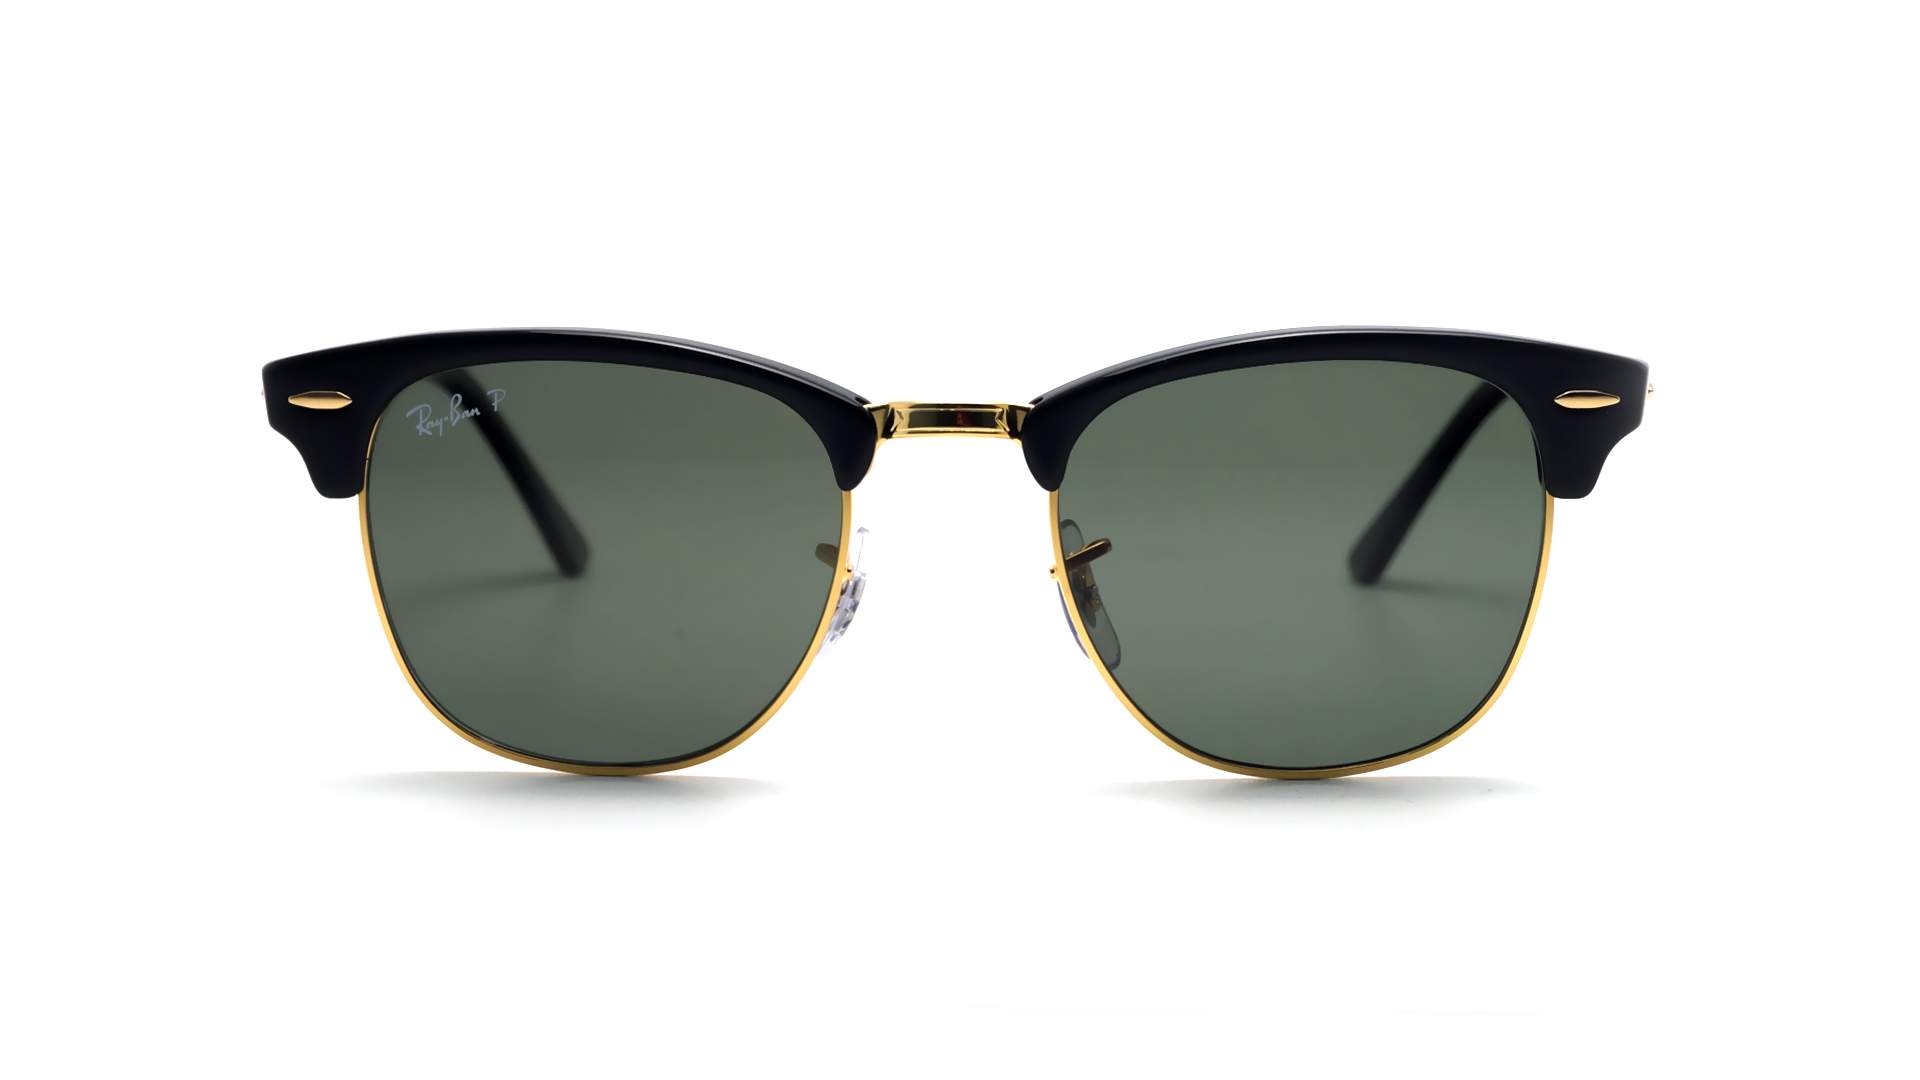 Sunglasses Ray-Ban Clubmaster Black RB3016 901/58 51-21 Polarized in ...